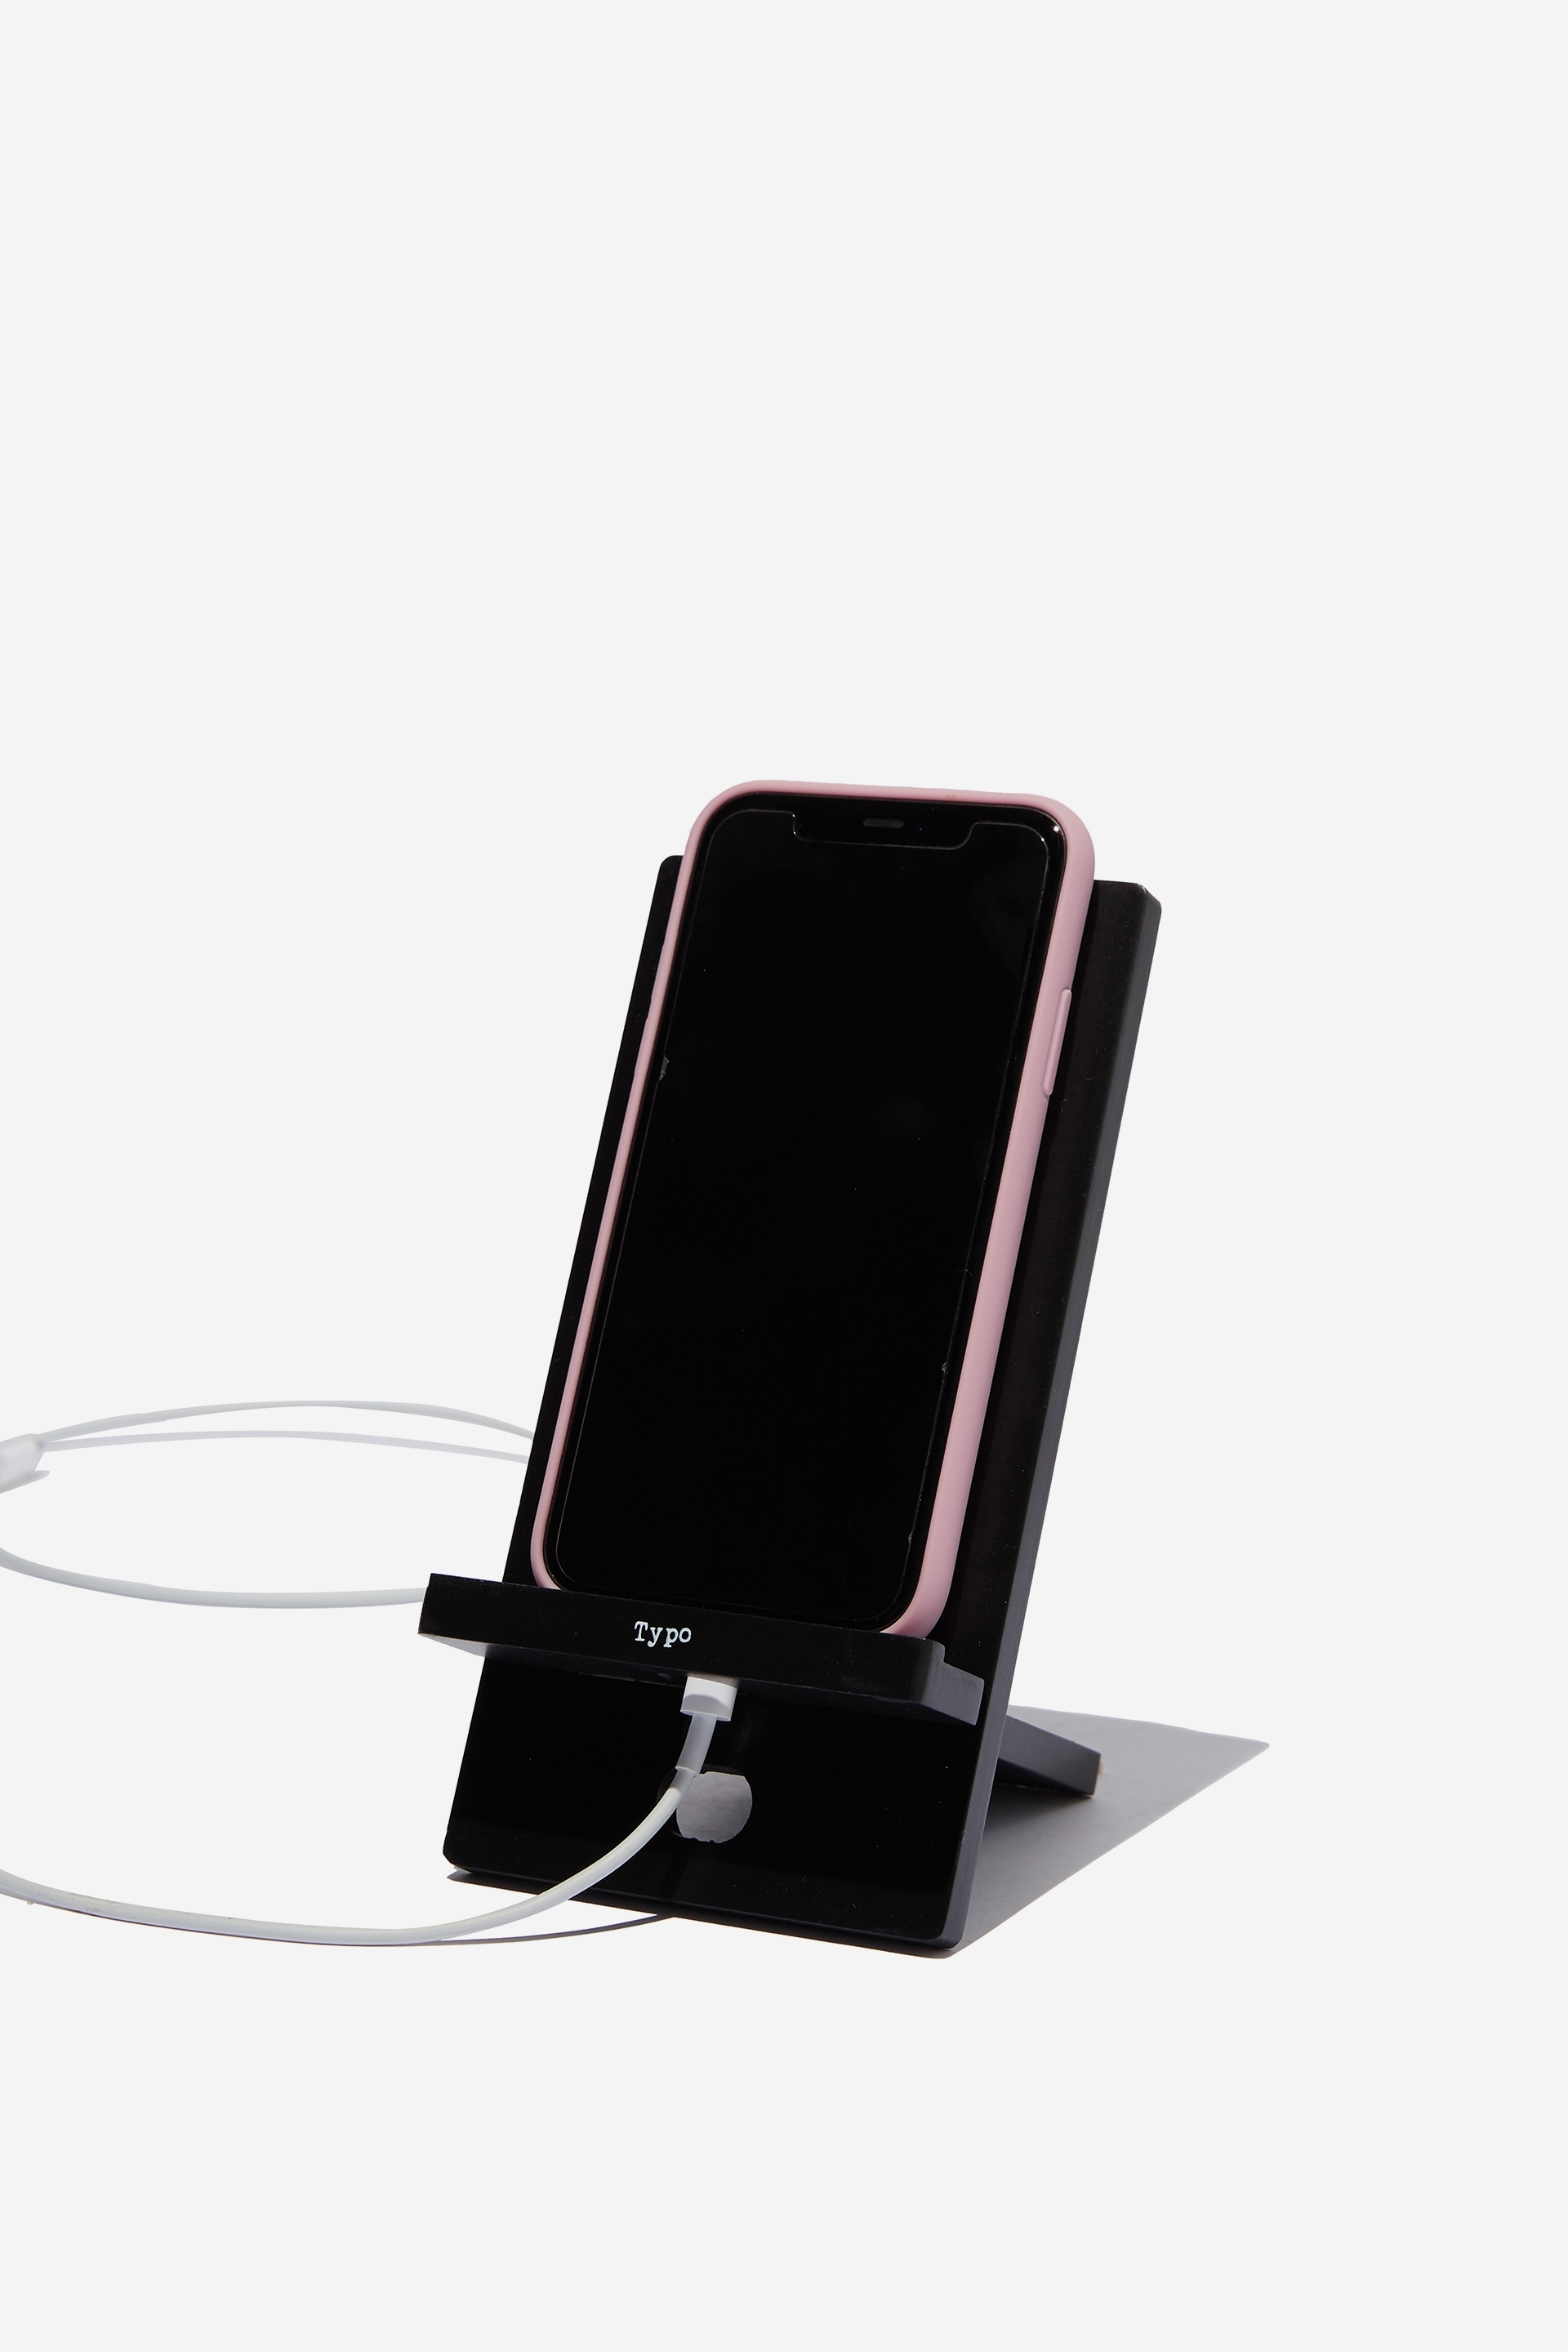 Typo - On Hold Phone Stand - Black